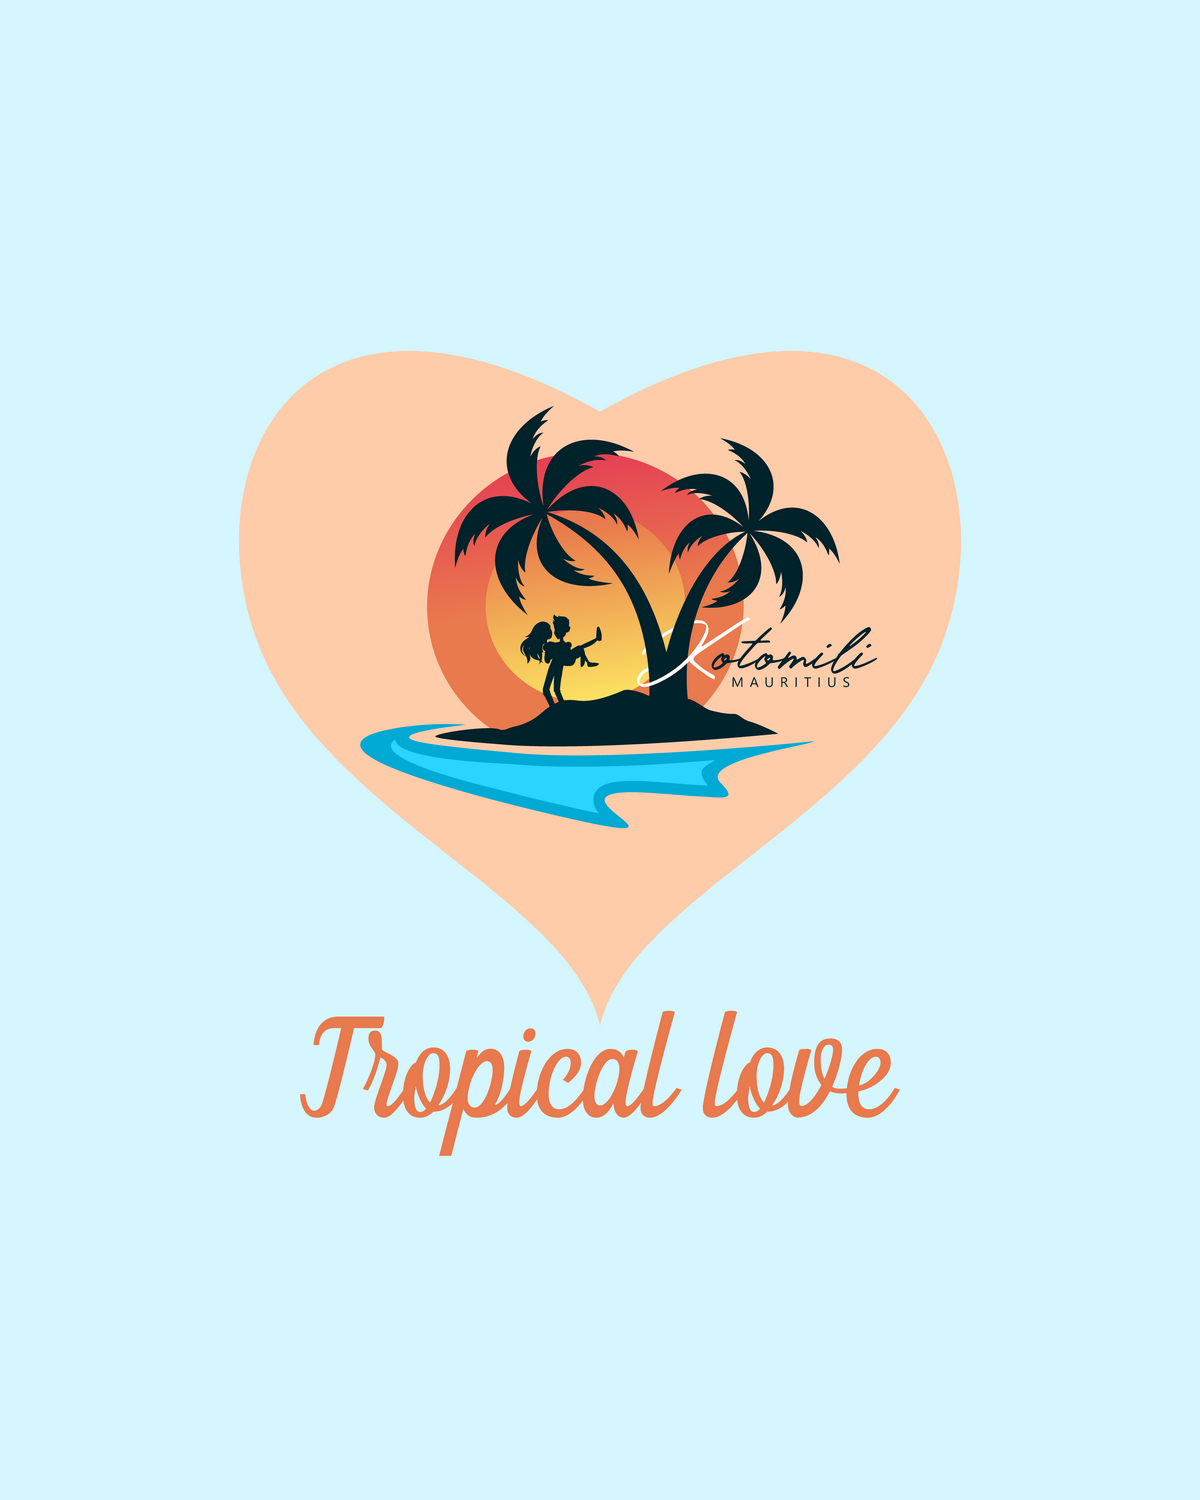 Tropical love by Kotomili